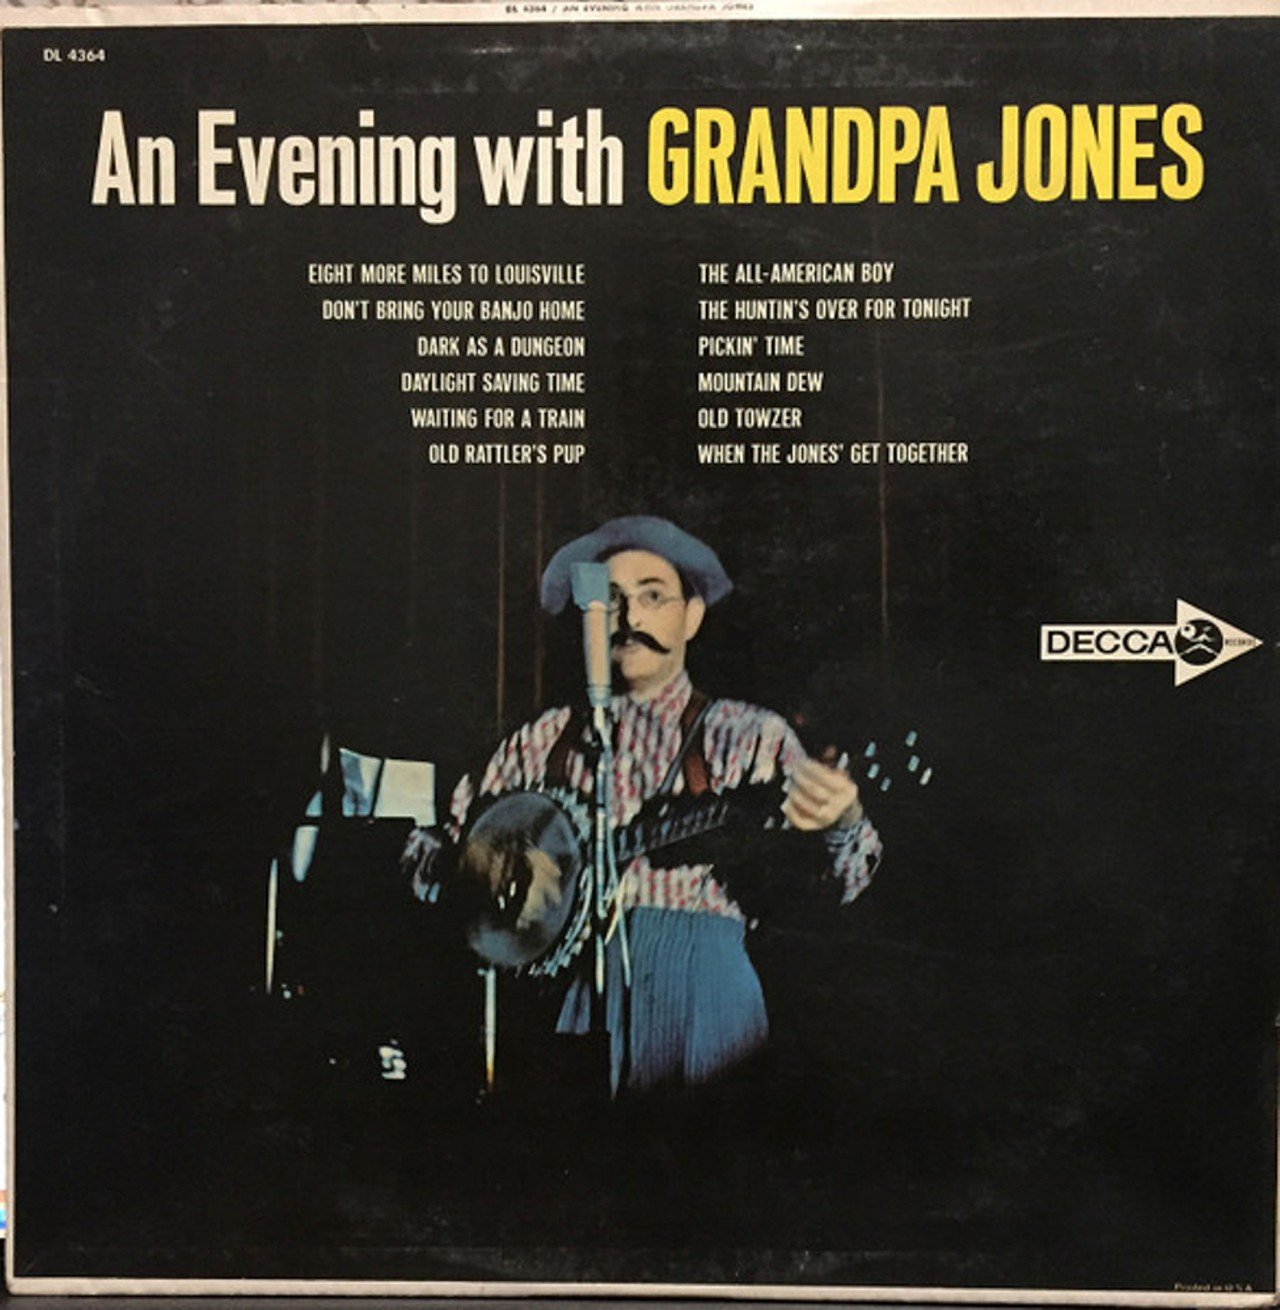  Grandpa Jones &#151; &#147;Eight More Miles to Louisville&#148; 
&#147;Eight more miles and Louisville will come into my view
Eight more miles on this old road and I'll never more be blue
I knew someday that I'd come back, I knew it from the start
Eight more miles to Louisville, the hometown of my heart&#148;